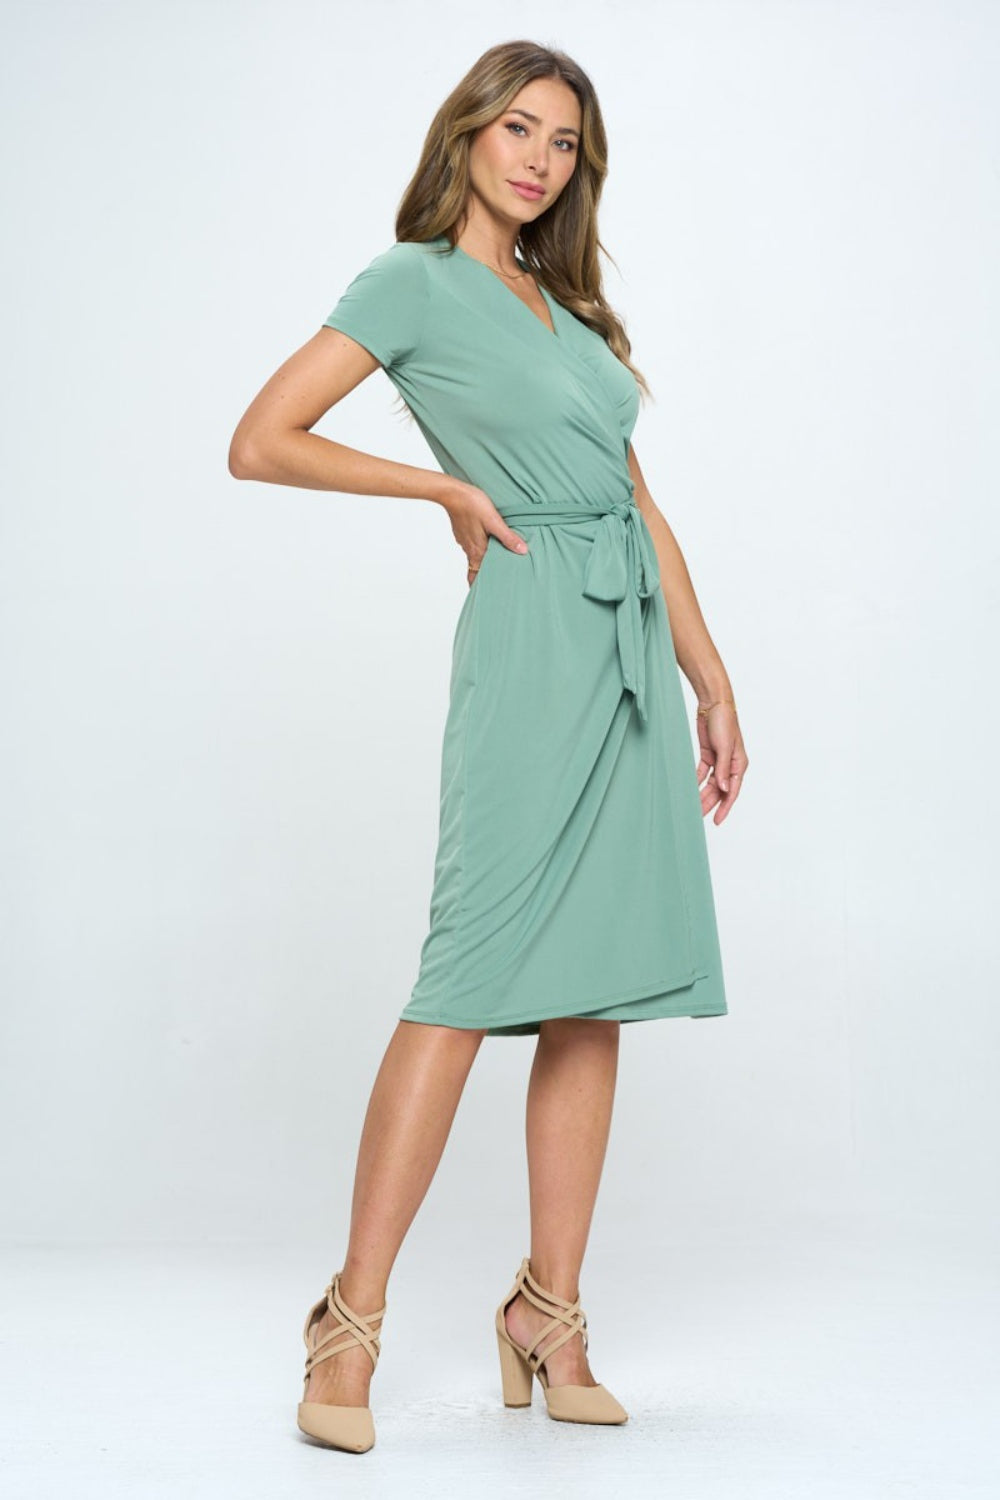 This tie front surplice short sleeve dress is a fabulous addition to your summer wardrobe. The surplice neckline creates a flattering silhouette while adding a touch of sophistication. The tie front detail at the waist adds a stylish and trendy element to the dress.  S  - L